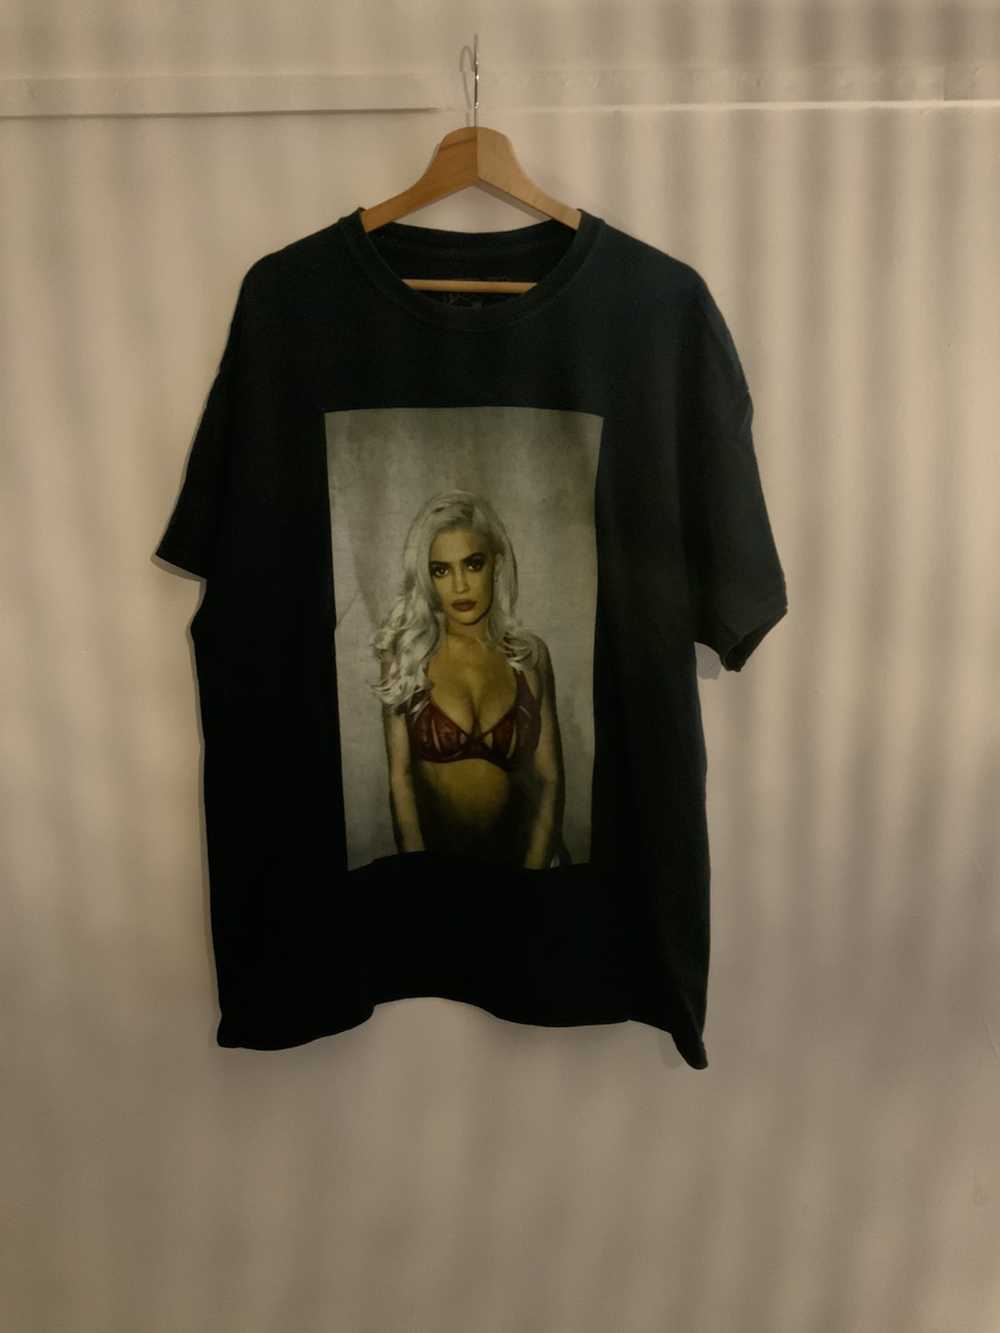 Kylie Cosmetics Kylie Jenner T-Shirt - image 1